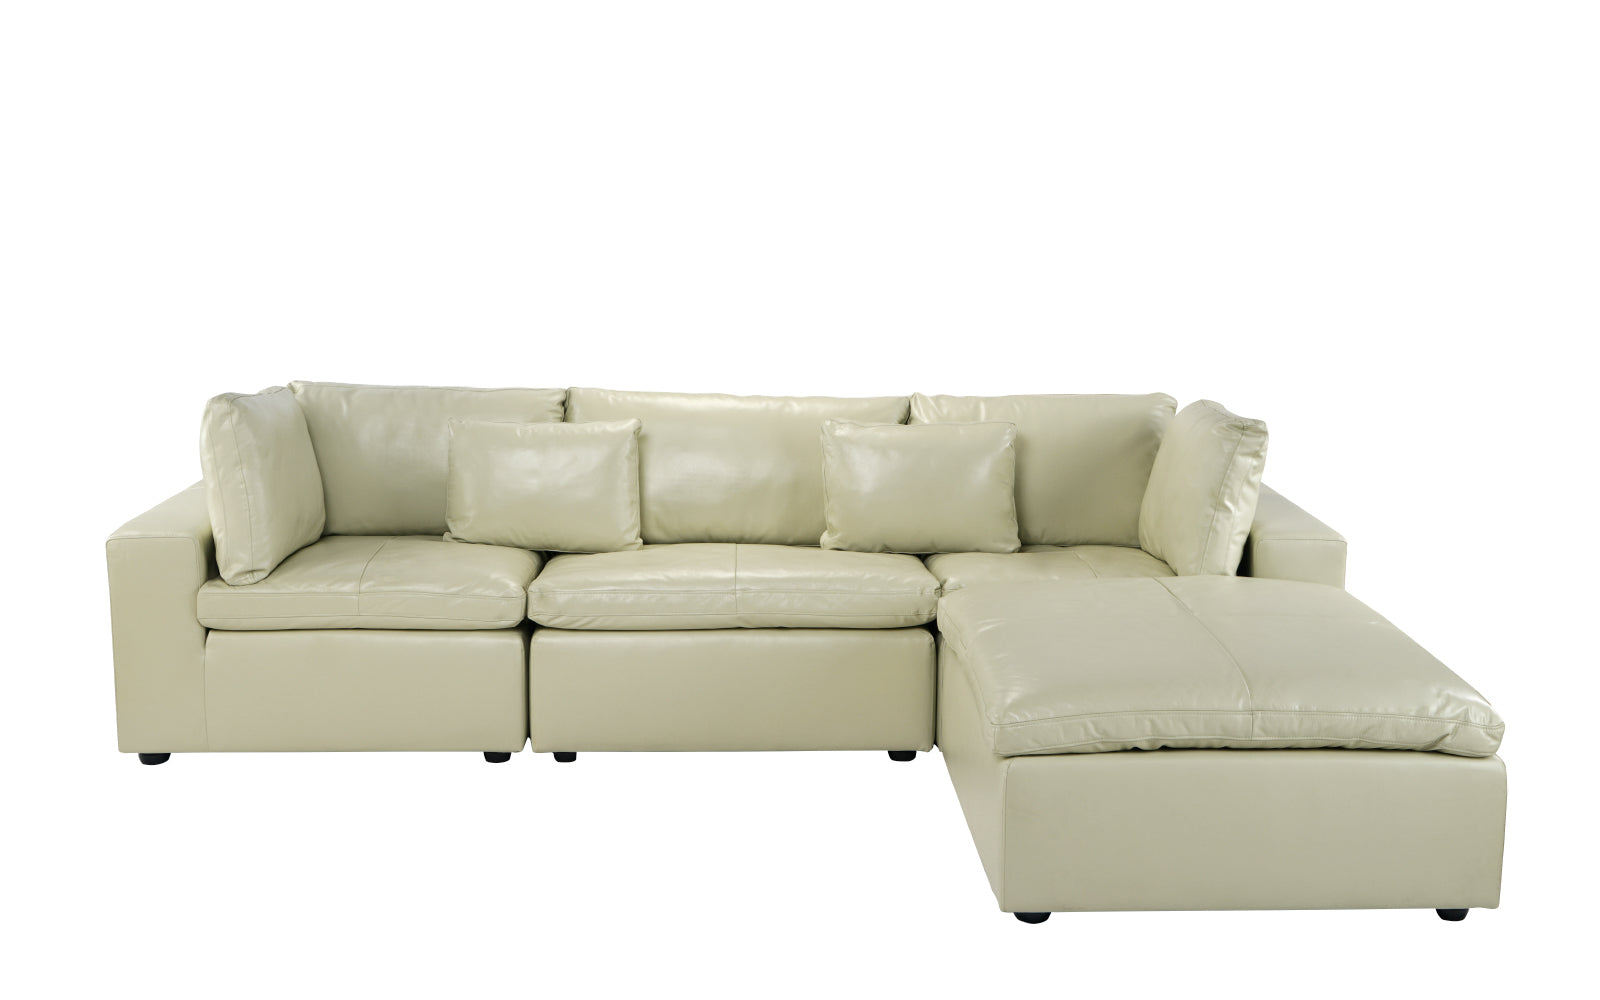 Sigur Modern Leather Match Sectional Sofa With Chaise